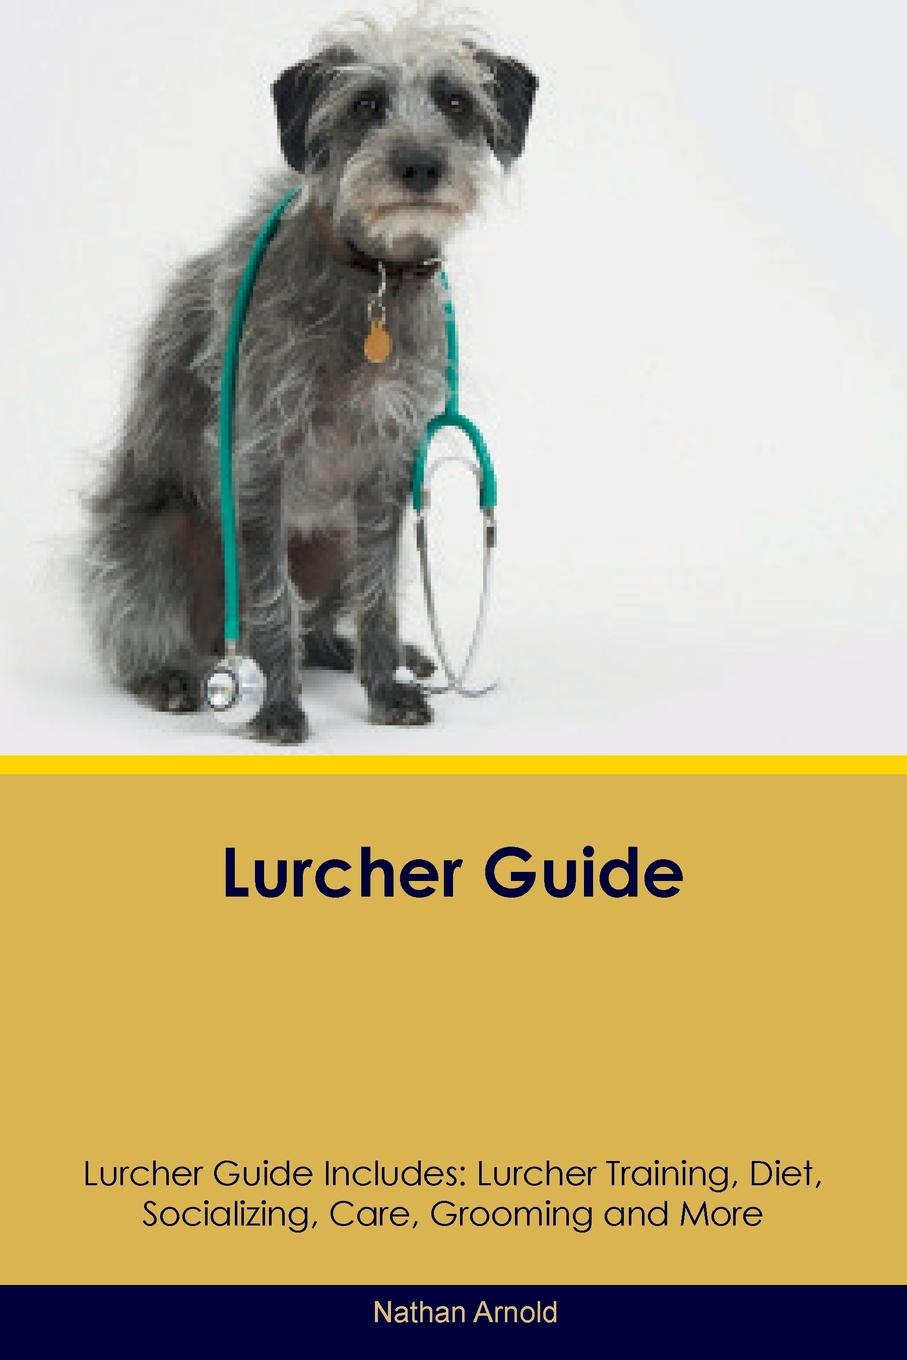 Lurcher Guide Lurcher Guide Includes. Lurcher Training, Diet, Socializing, Care, Grooming, Breeding and More